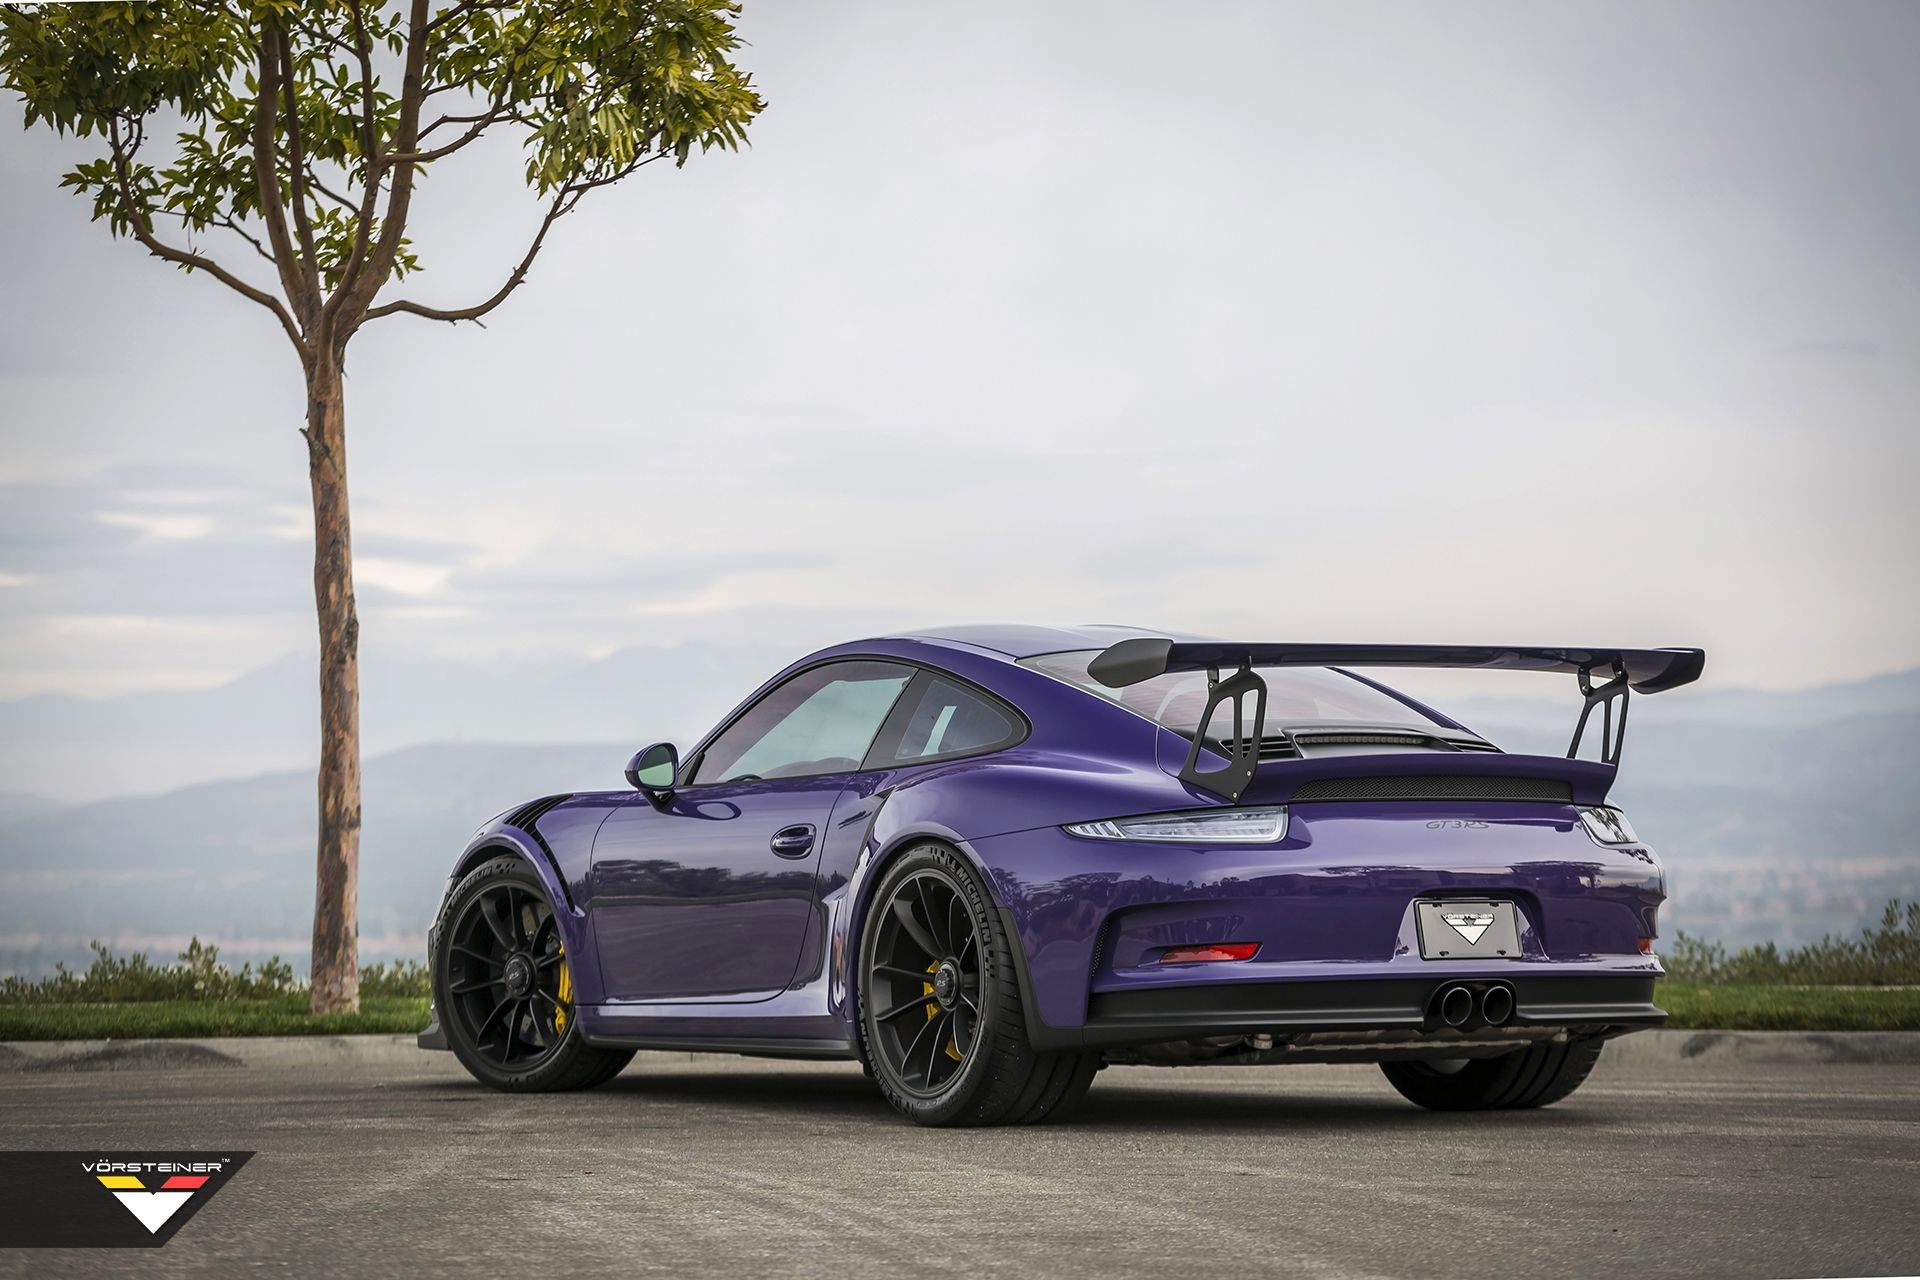 Purple Porsche 911 GT3RS with Large Wing Spoiler - Photo by Vorstiner